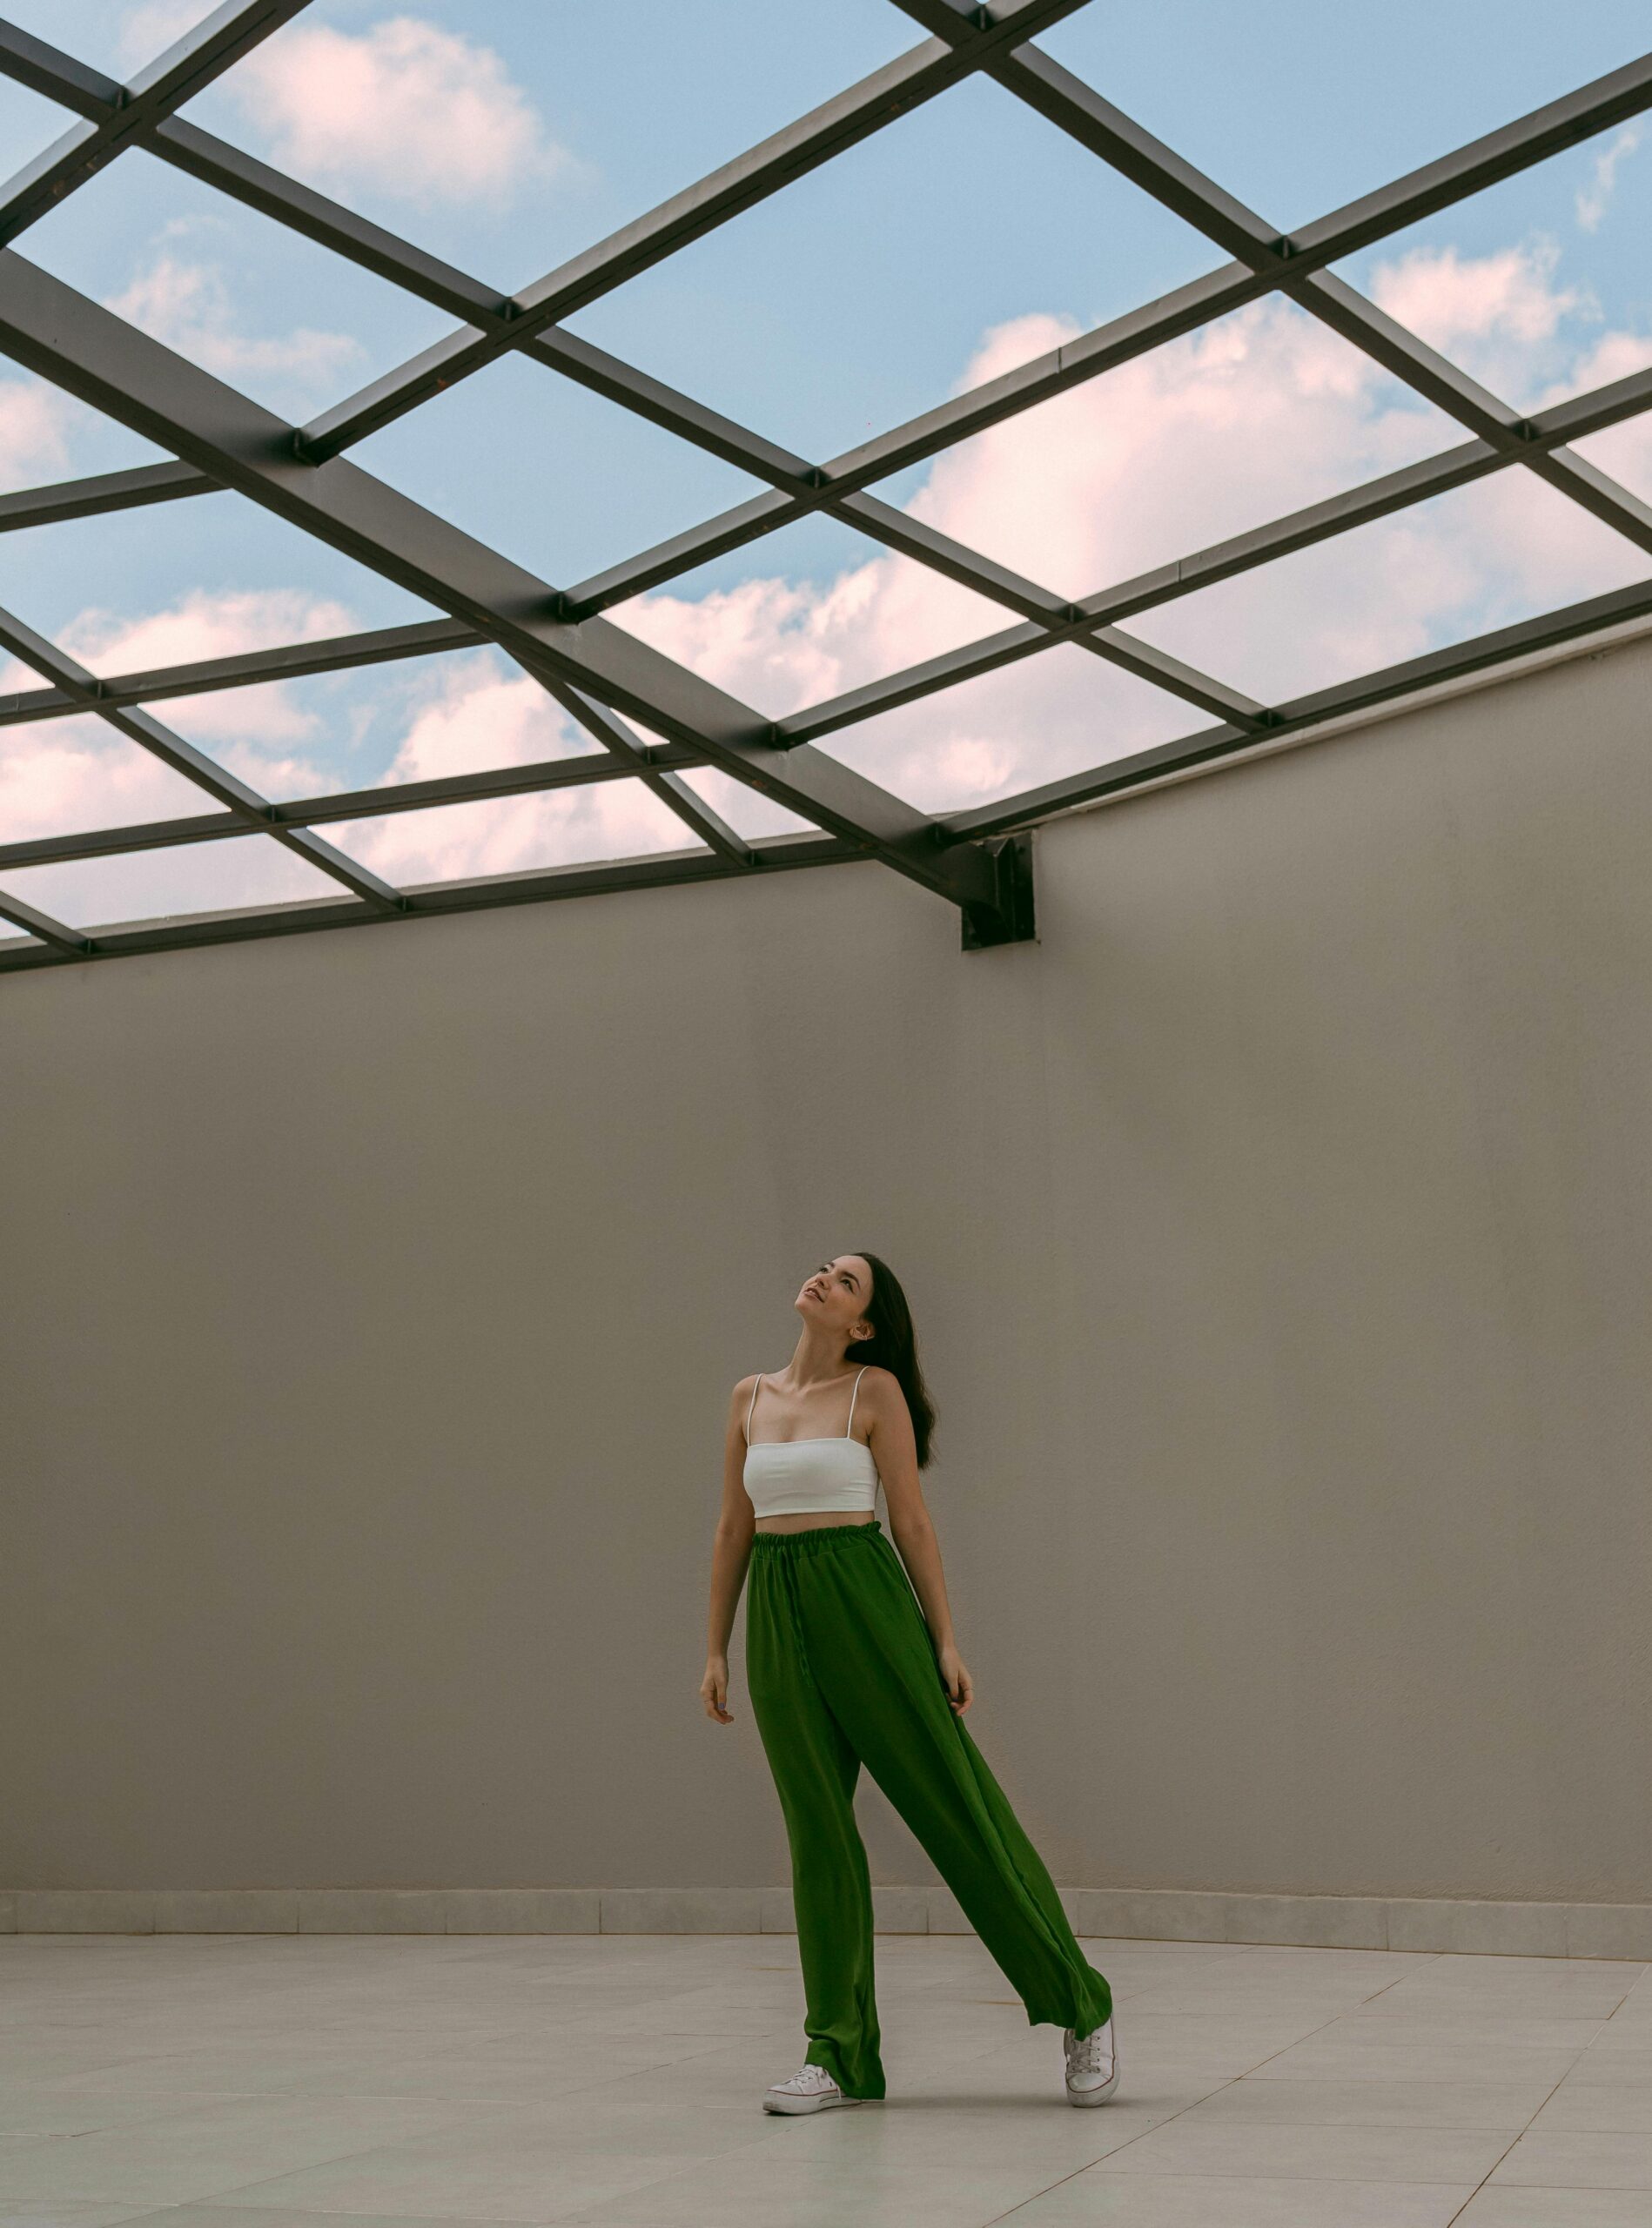 A woman stands confidently, looking upward at a transparent glass ceiling above her. The ceiling symbolizes barriers in the workplace. The image conveys determination and ambition, reflecting the theme of breaking through obstacles women face in business.